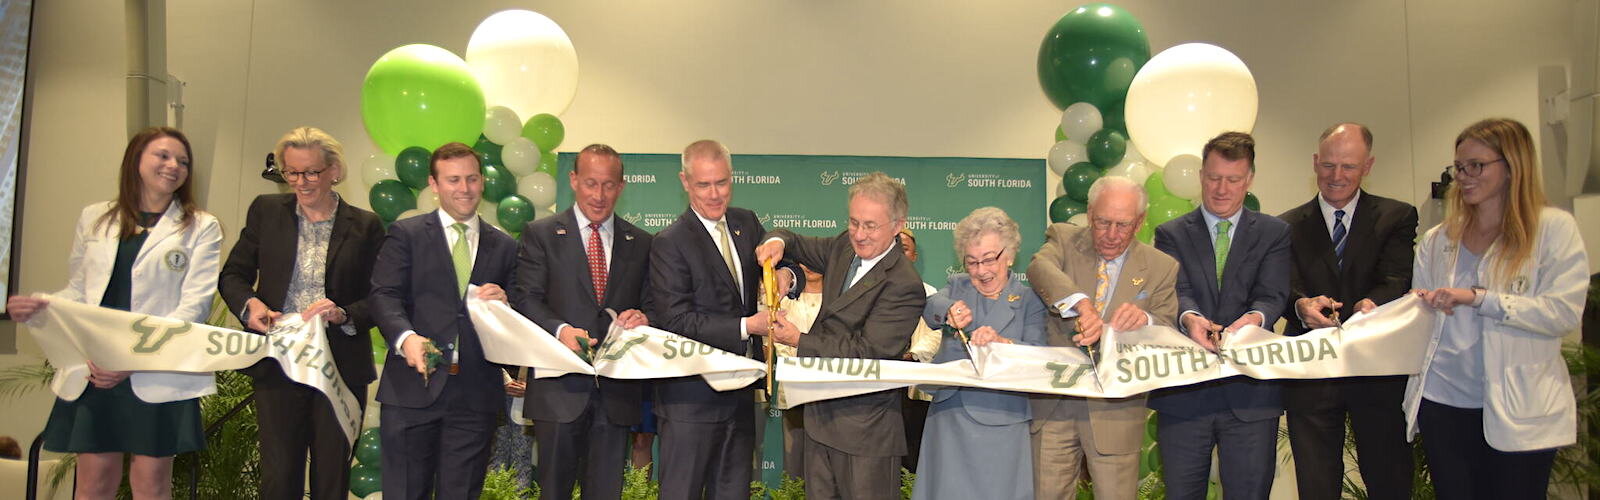 Dignitaries led by philanthropists Carol and Frank Morsani, USF Health VP Charles Lockwood, and Tampa Mayor Jane Castor cut the ribbon to the new USF Med School.